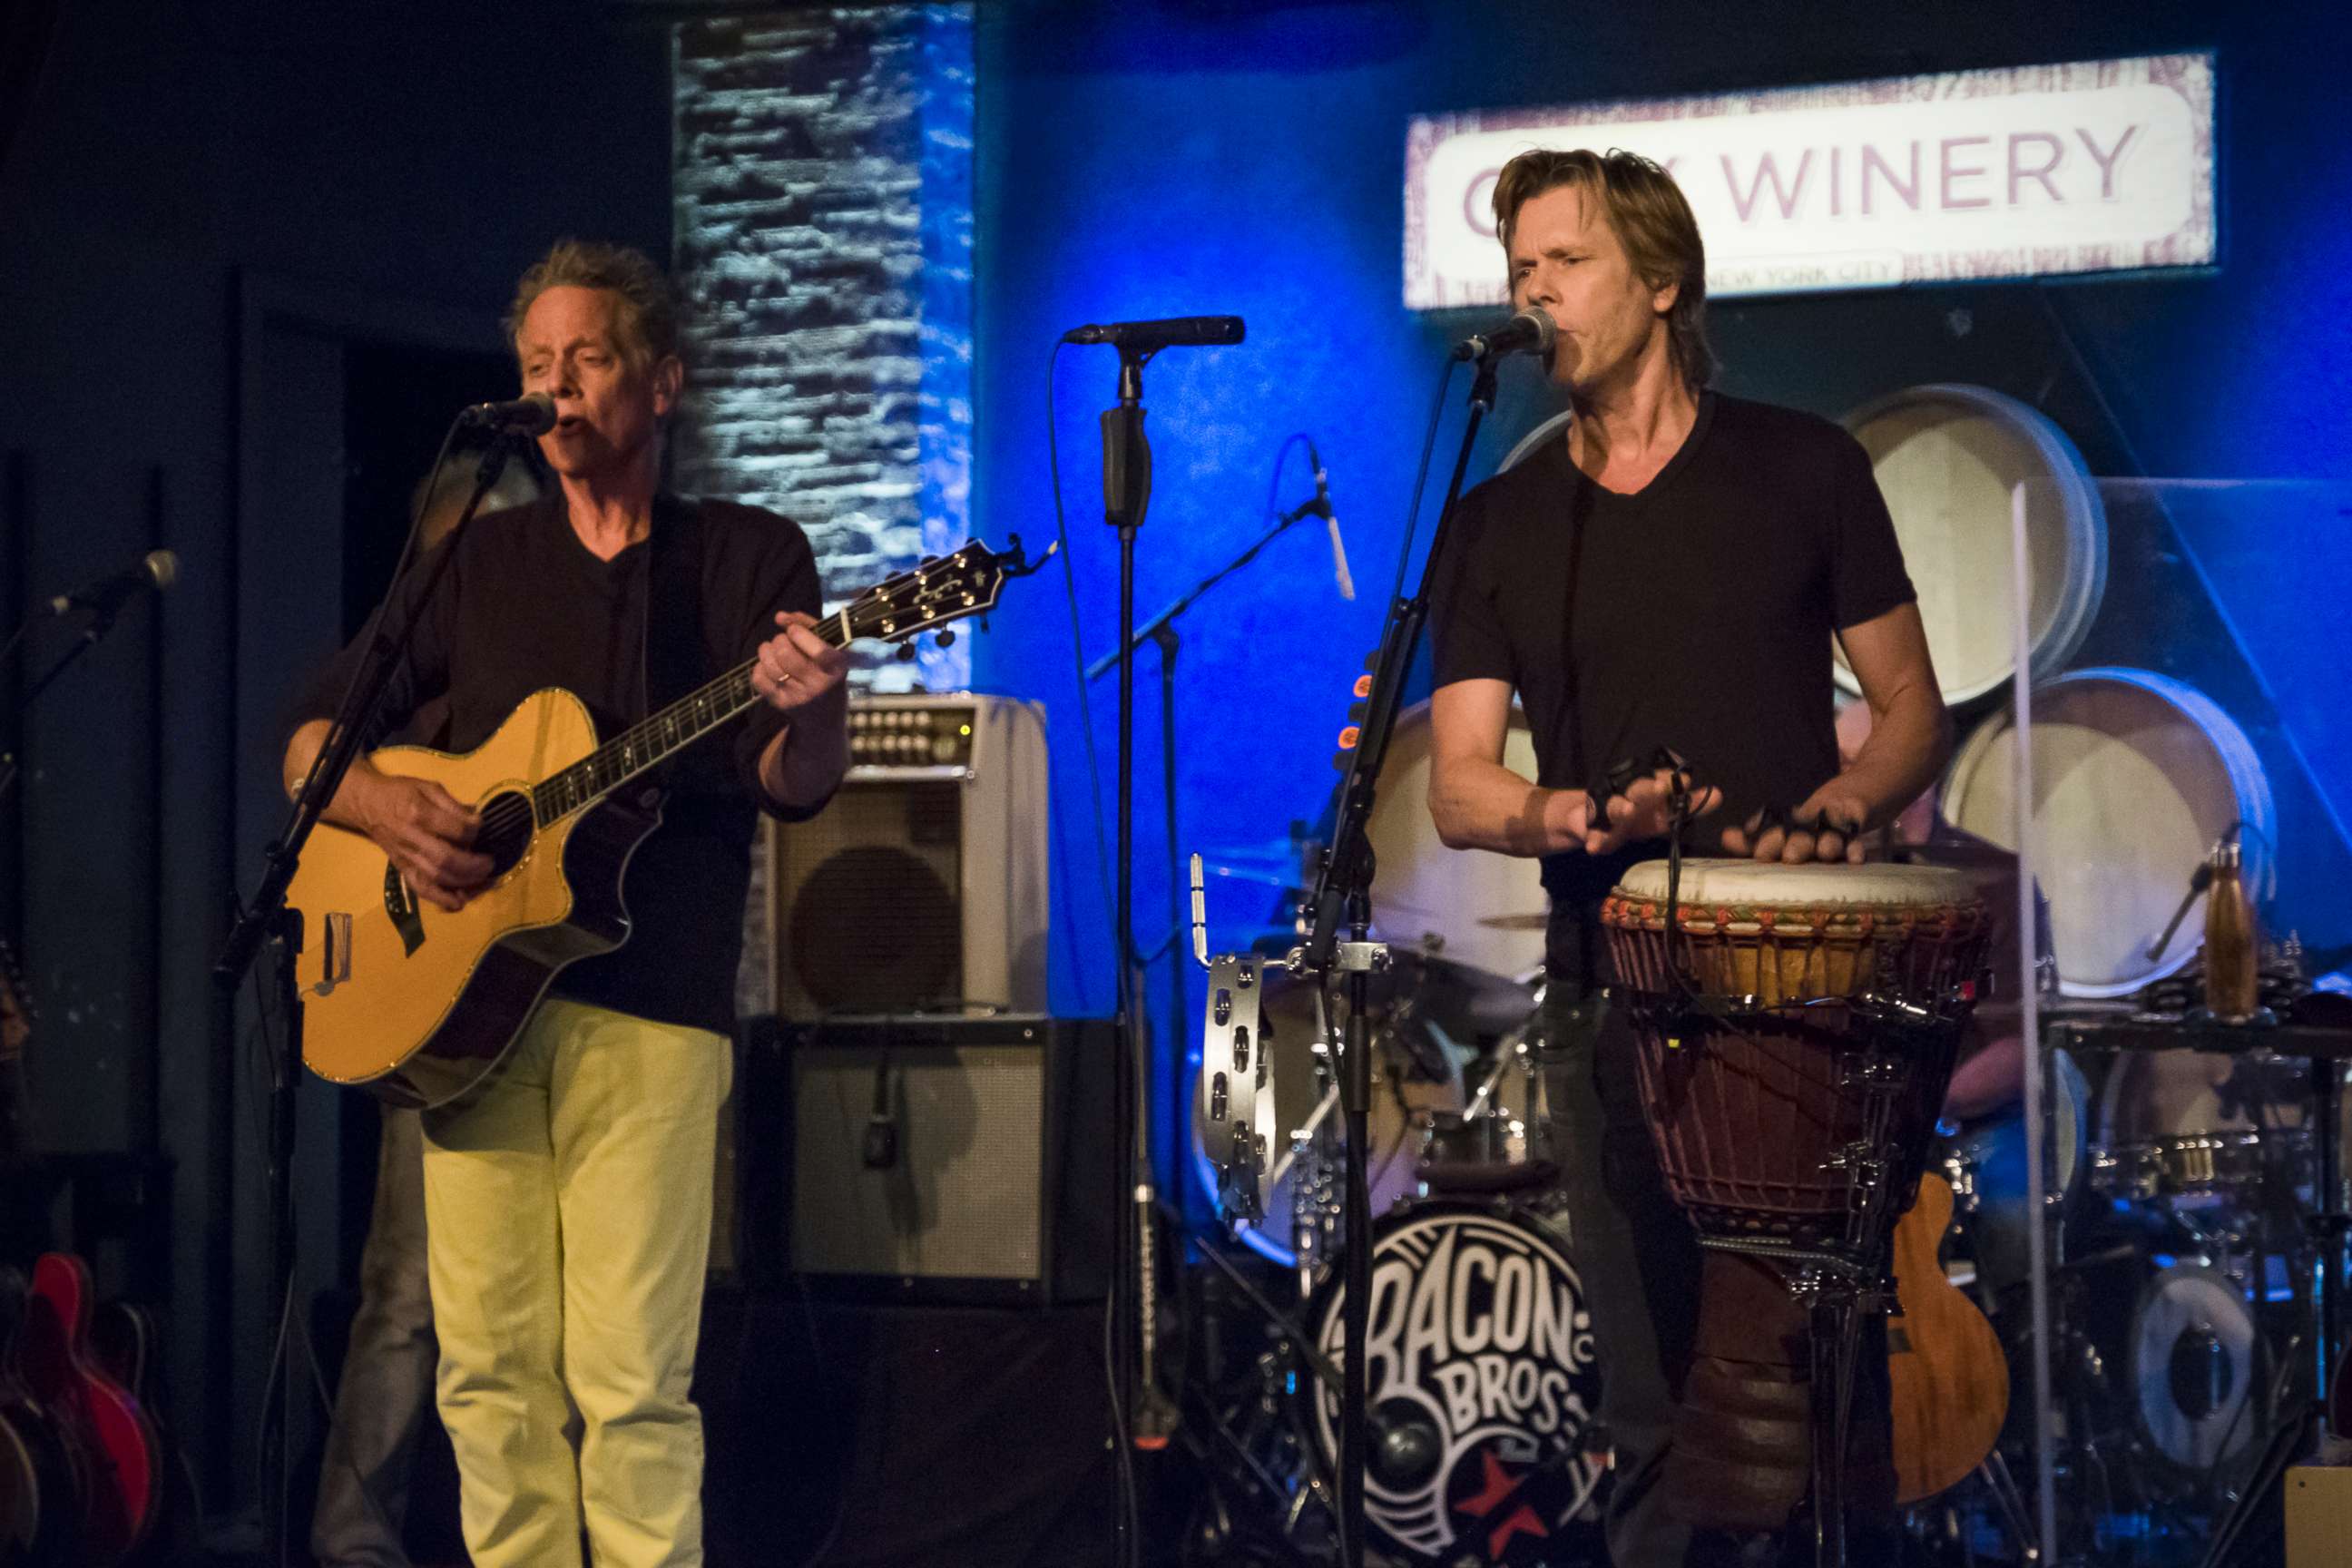 PHOTO: Kevin Bacon and Michael Bacon play a sold out show with the Bacon Brothers at City Winery in New York City, on August 22.